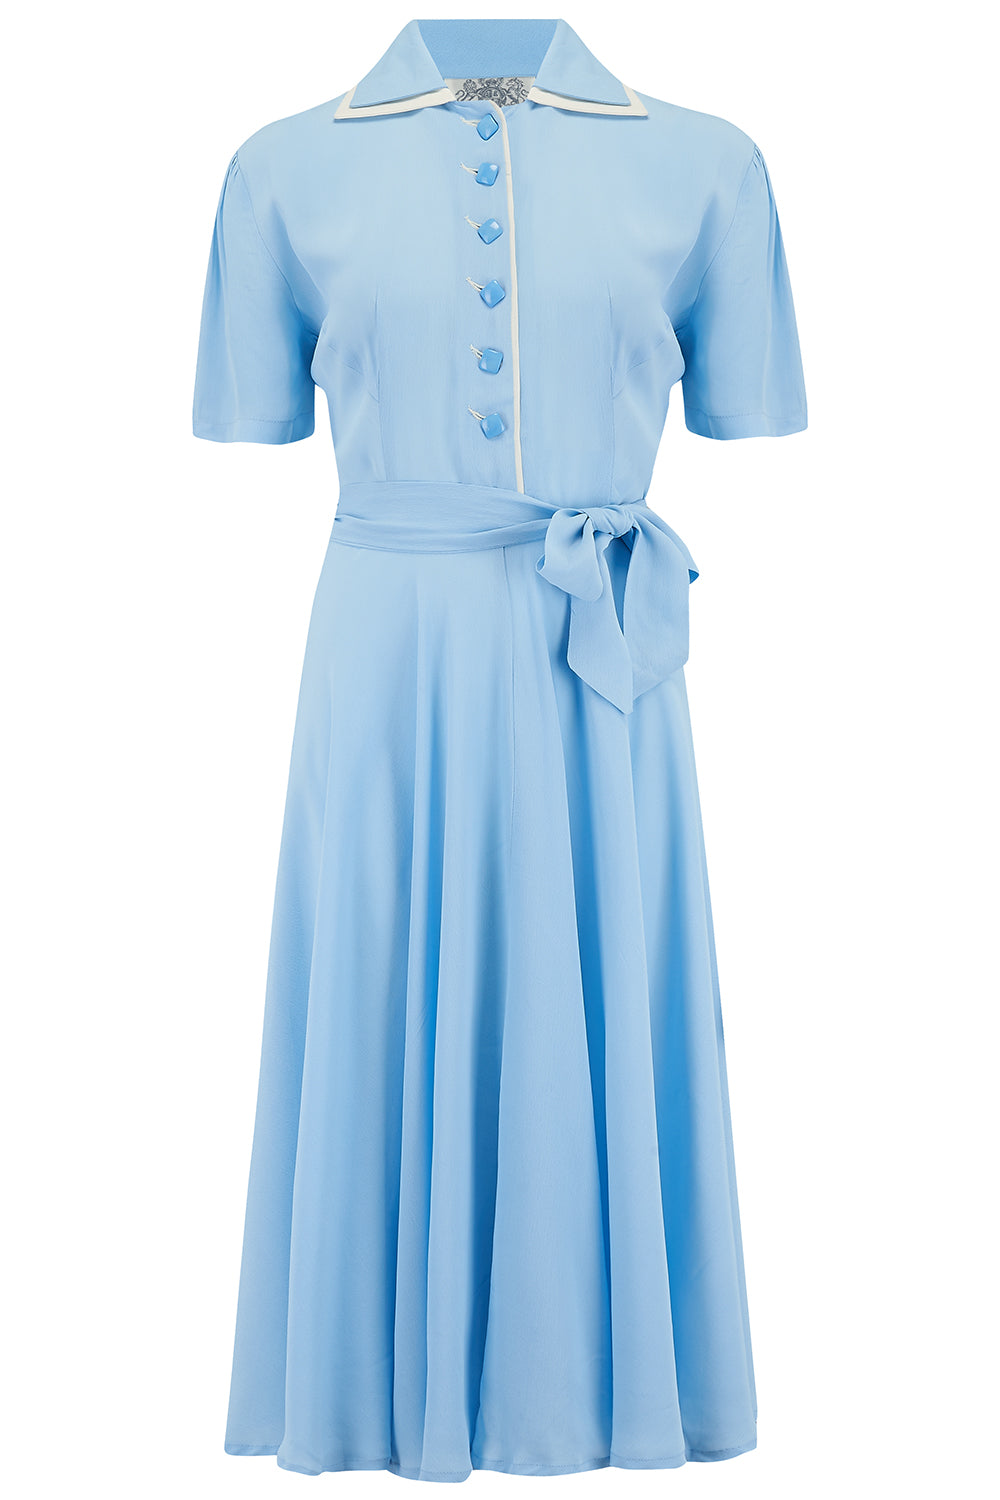 "Mae" Tea Dress in Powder Blue with Cream Contrasts, Classic 1940s Vintage Style - True and authentic vintage style clothing, inspired by the Classic styles of CC41 , WW2 and the fun 1950s RocknRoll era, for everyday wear plus events like Goodwood Revival, Twinwood Festival and Viva Las Vegas Rockabilly Weekend Rock n Romance The Seamstress of Bloomsbury